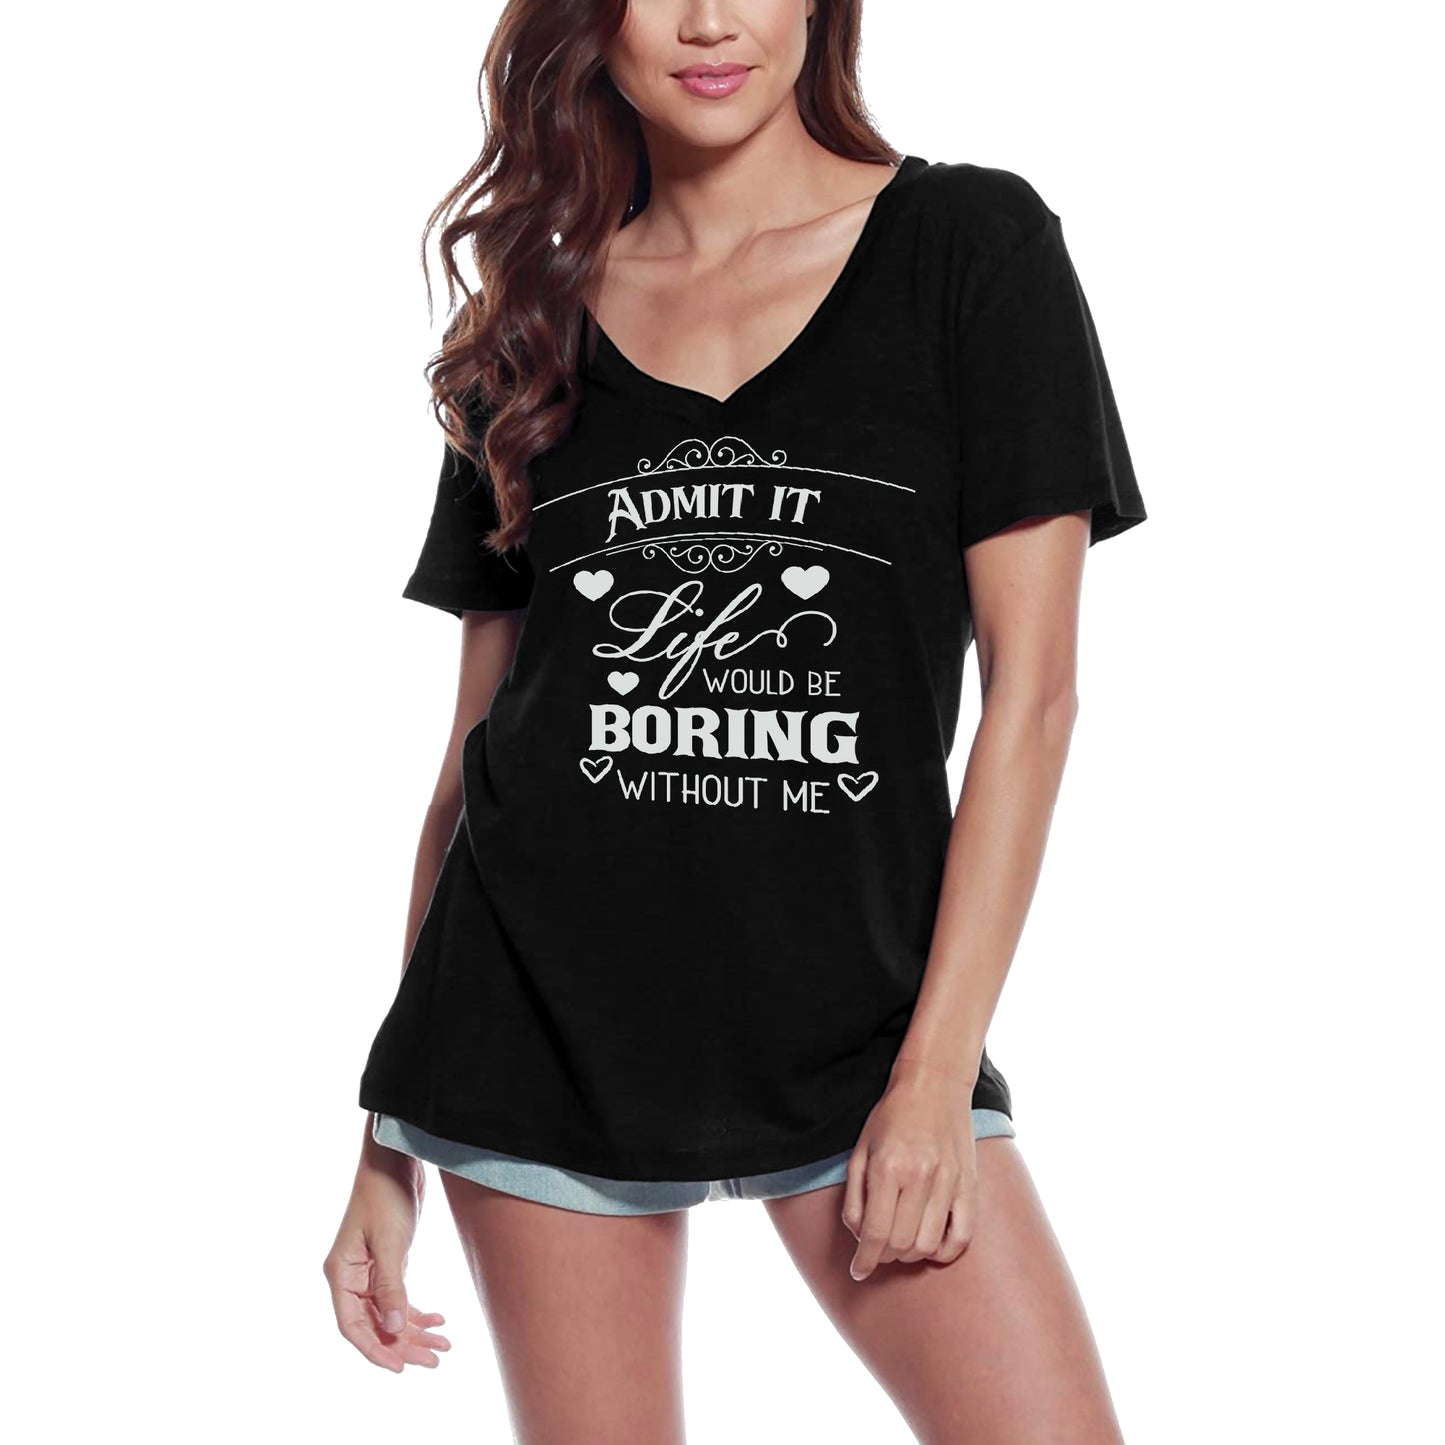 ULTRABASIC Women's T-Shirt Life Would be Boring Without Me - Funny Humor Tee Shirt Tops